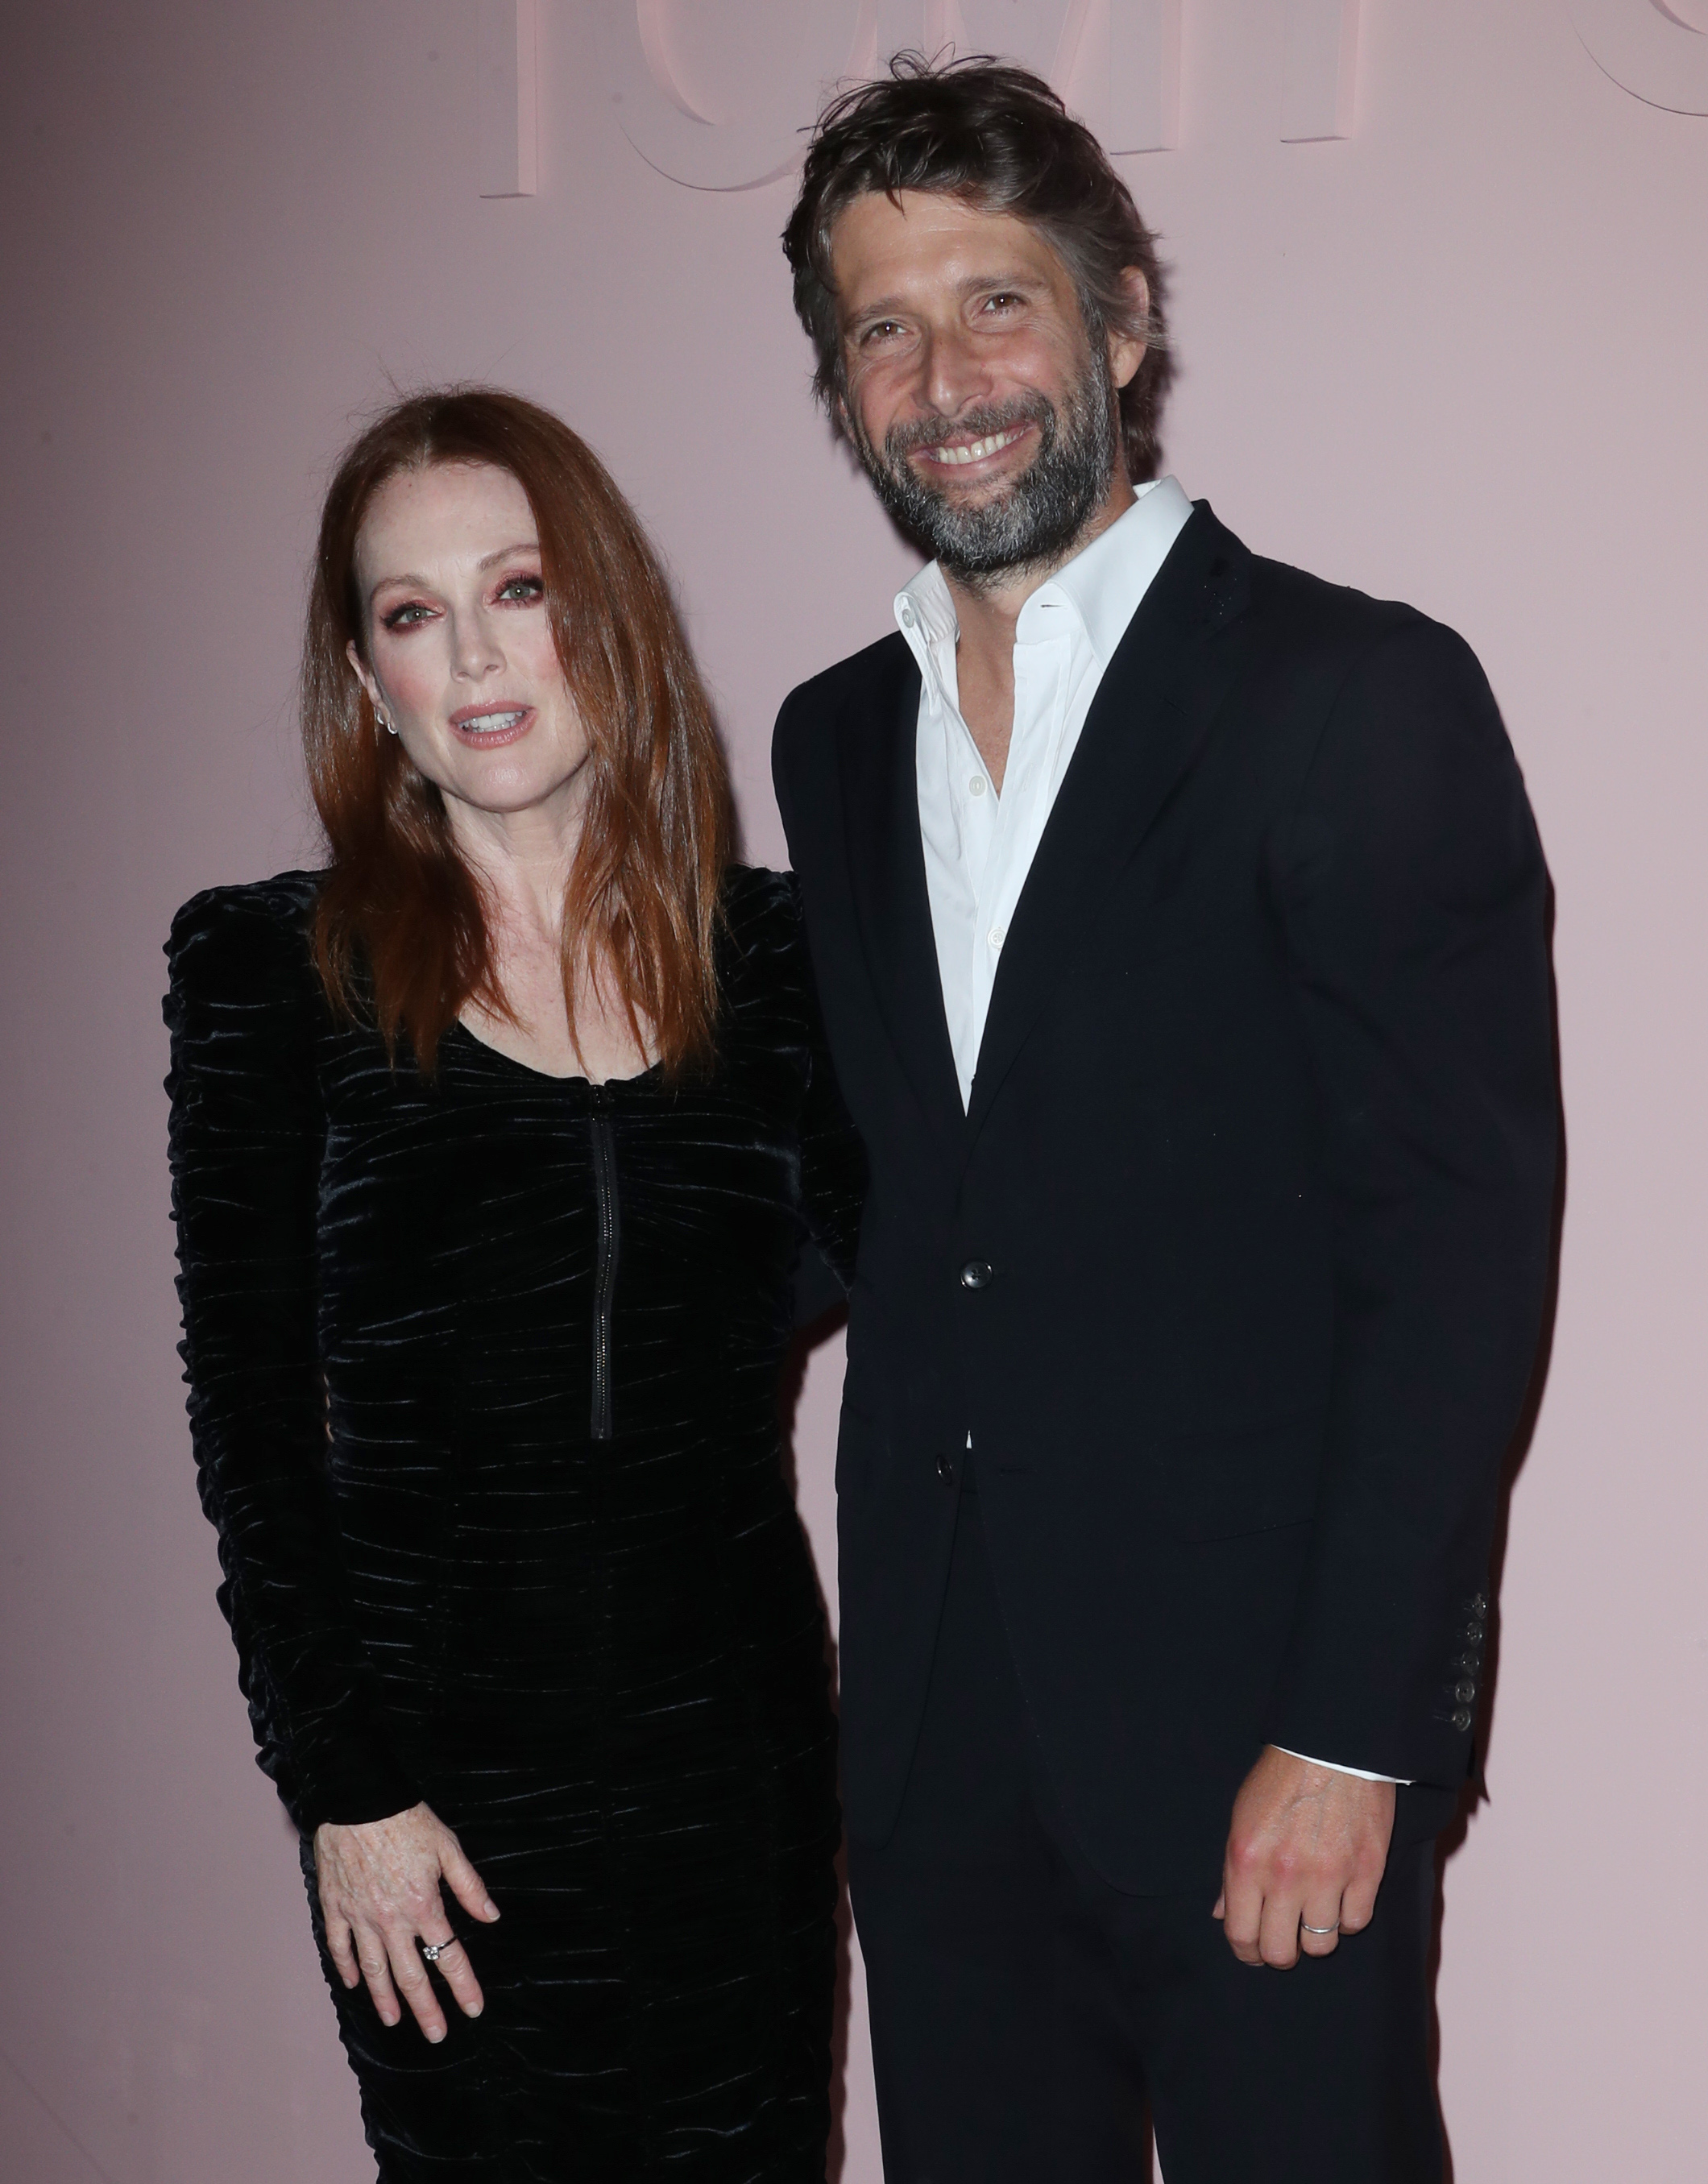 Julianne pictured with her husband Bart Freundlich at an event in Sep 2017